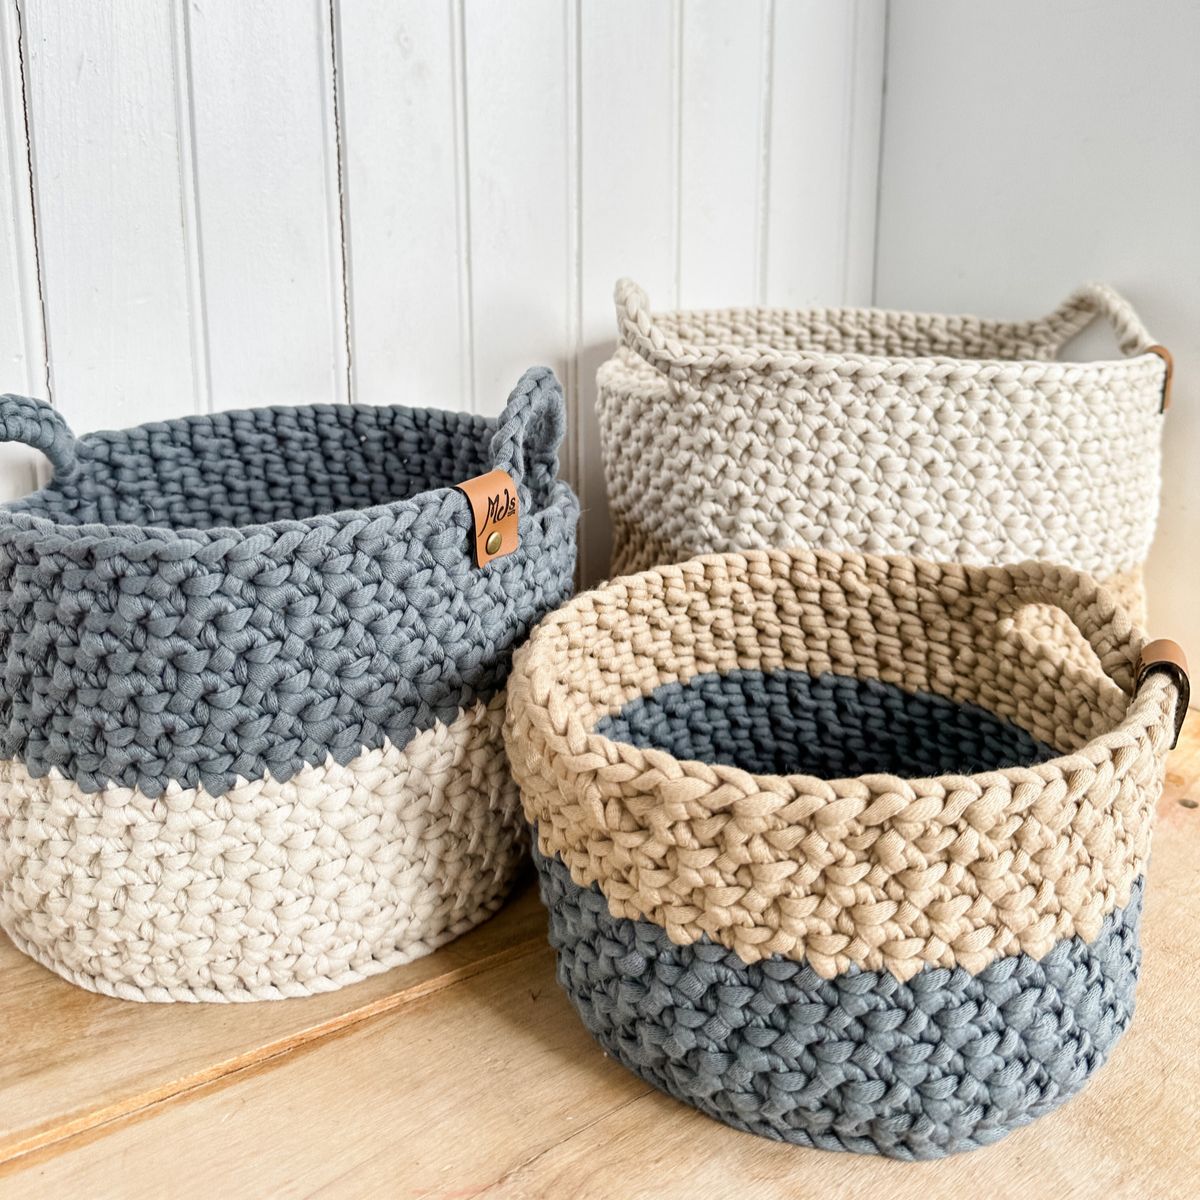 Ravelry: How to Cut T-shirt Yarn and Crochet a Basket pattern by